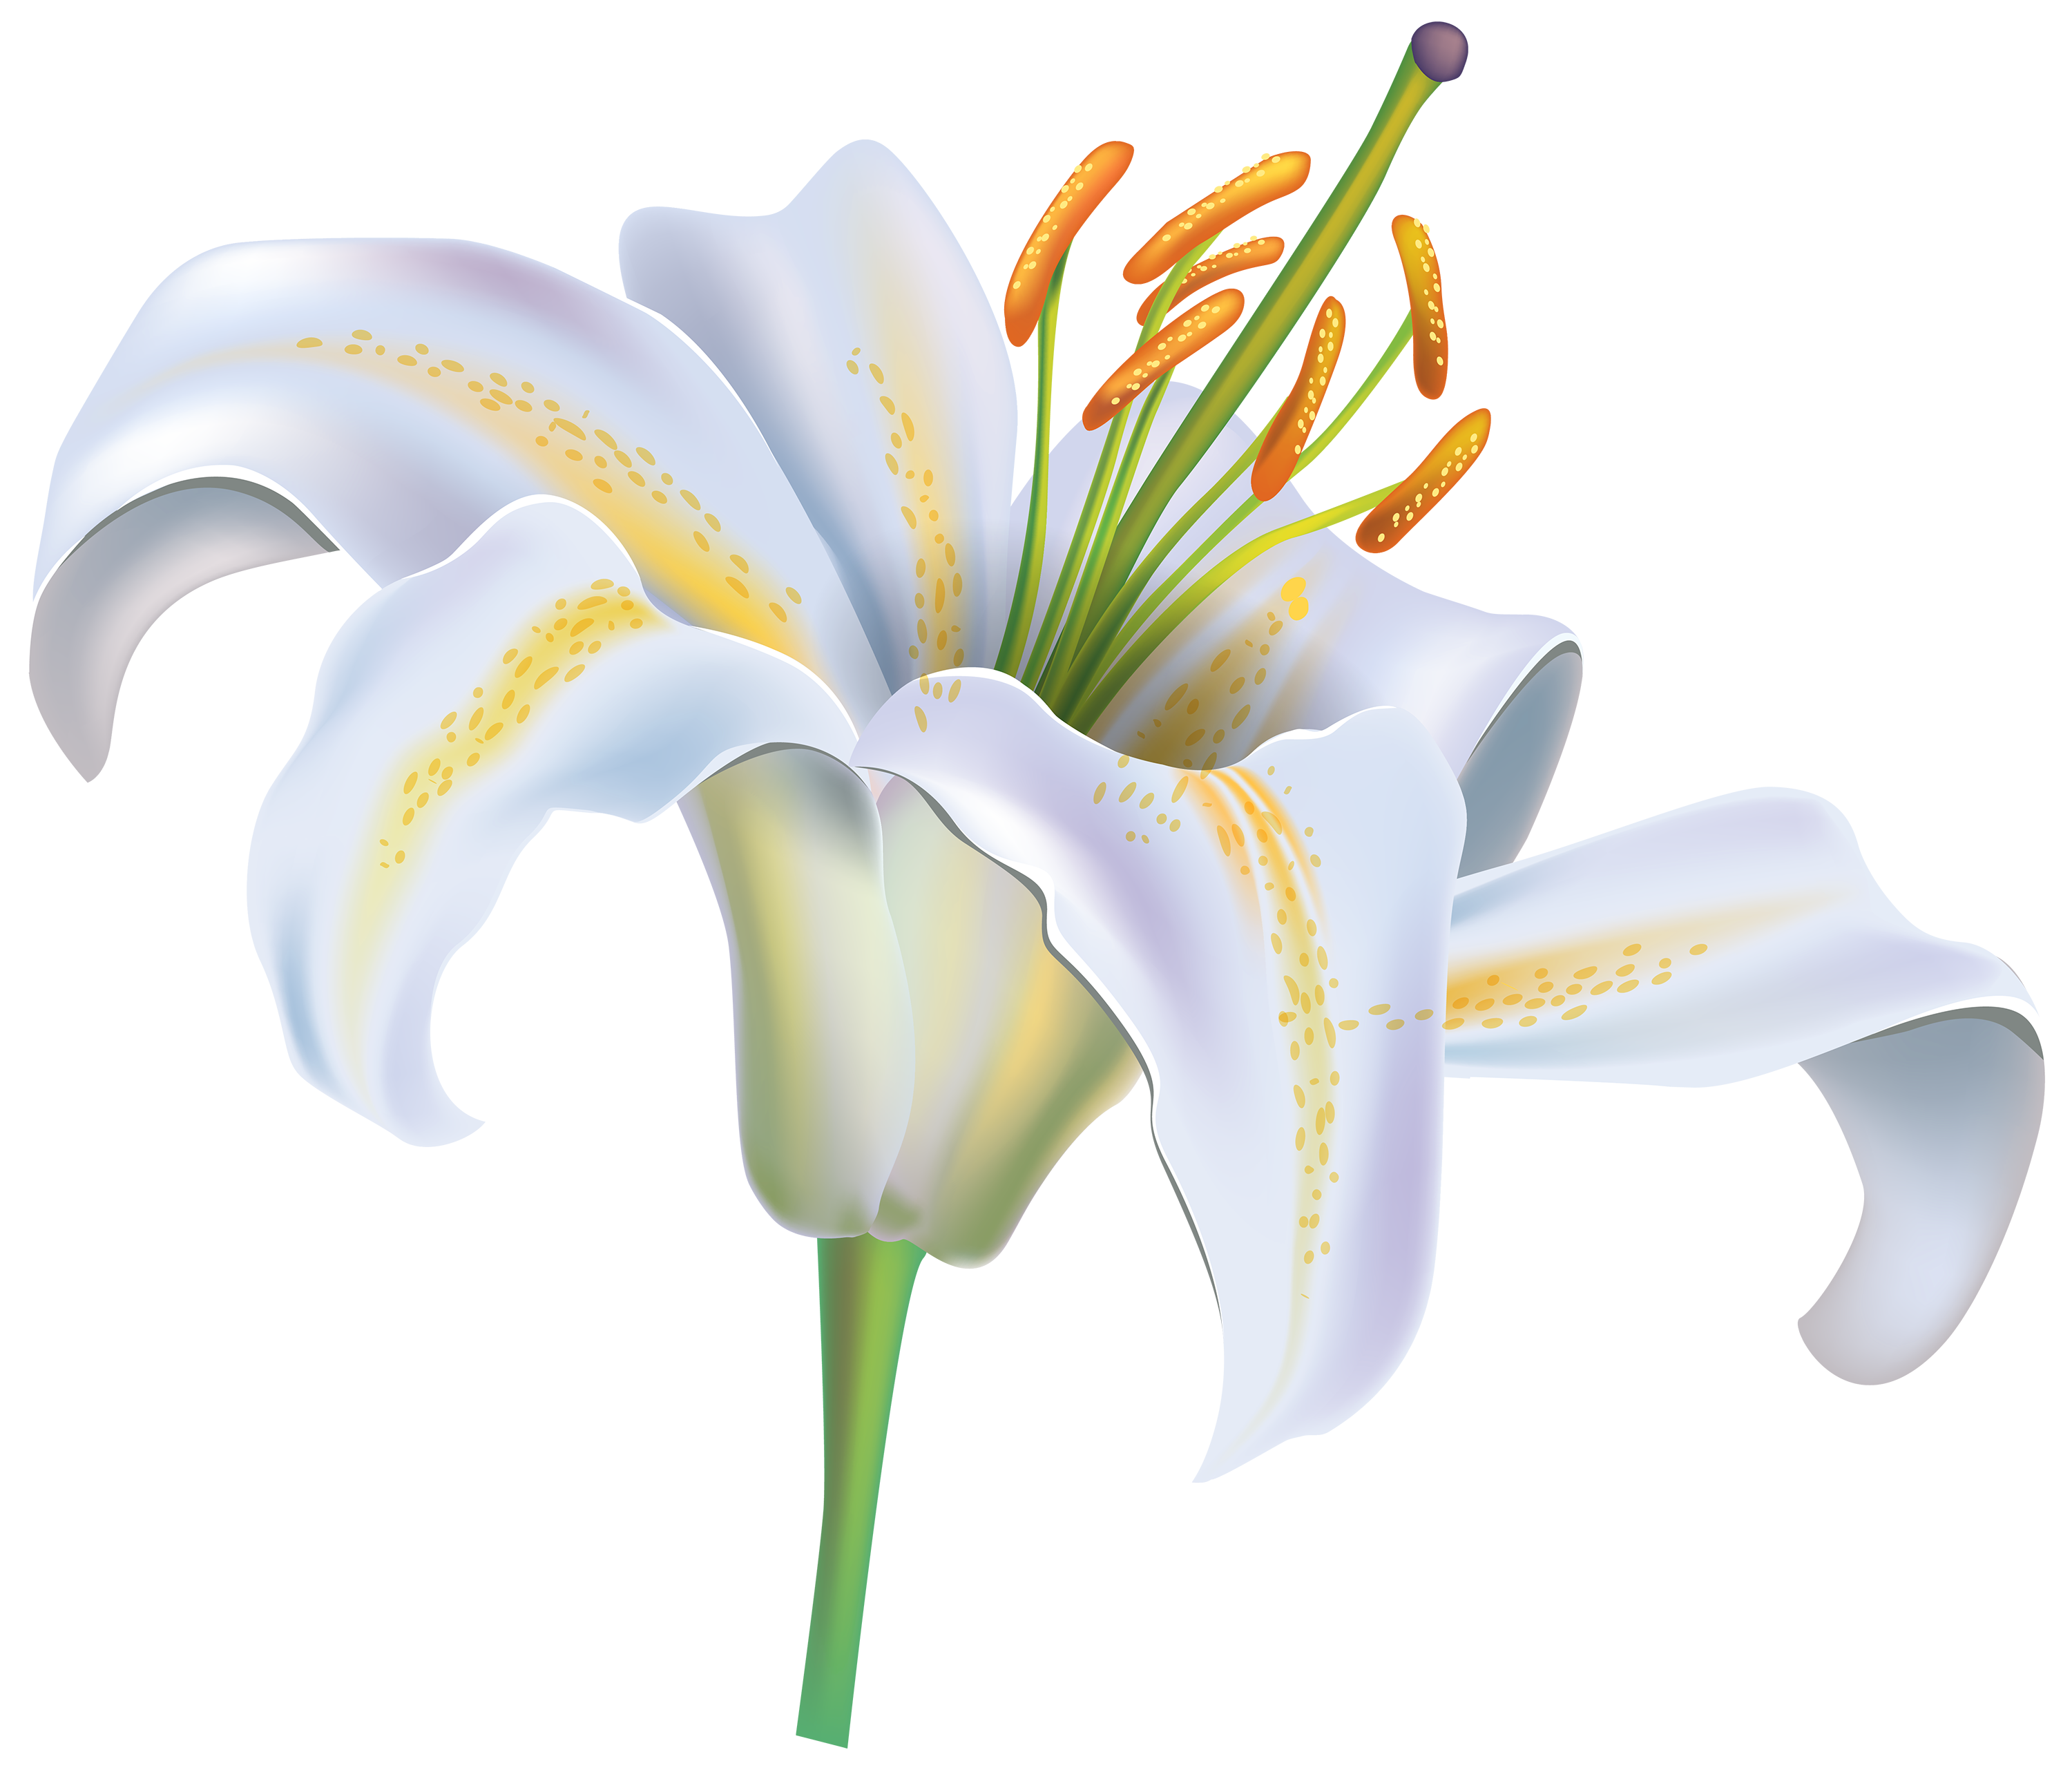 Lily Flower Transparent Png Pictures Free Icons And Png Backgrounds